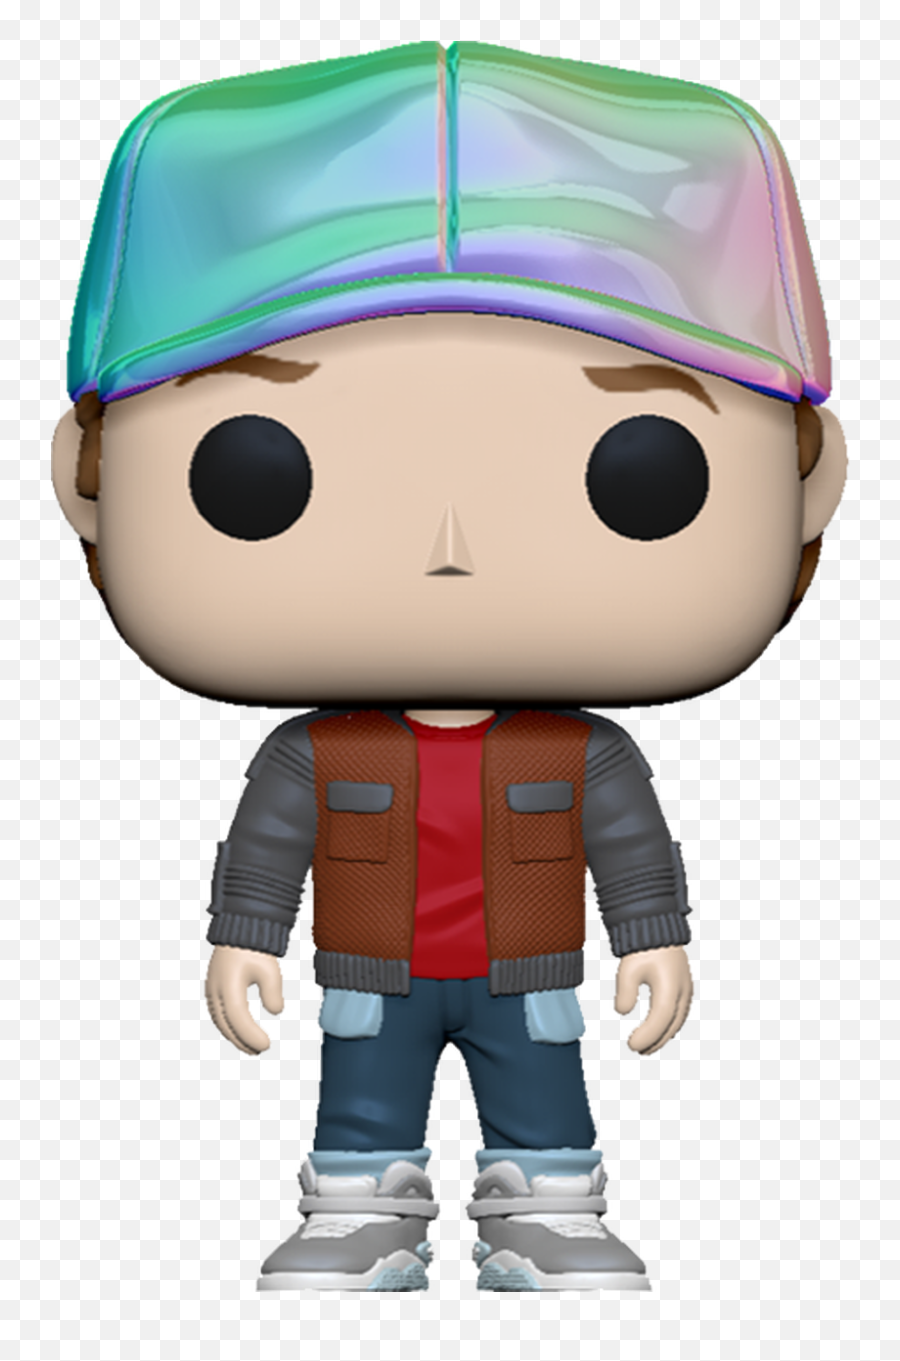 Back To The Future Part Ii - Marty Mcfly Pop Vinyl Figure Emoji,The Future Clipart